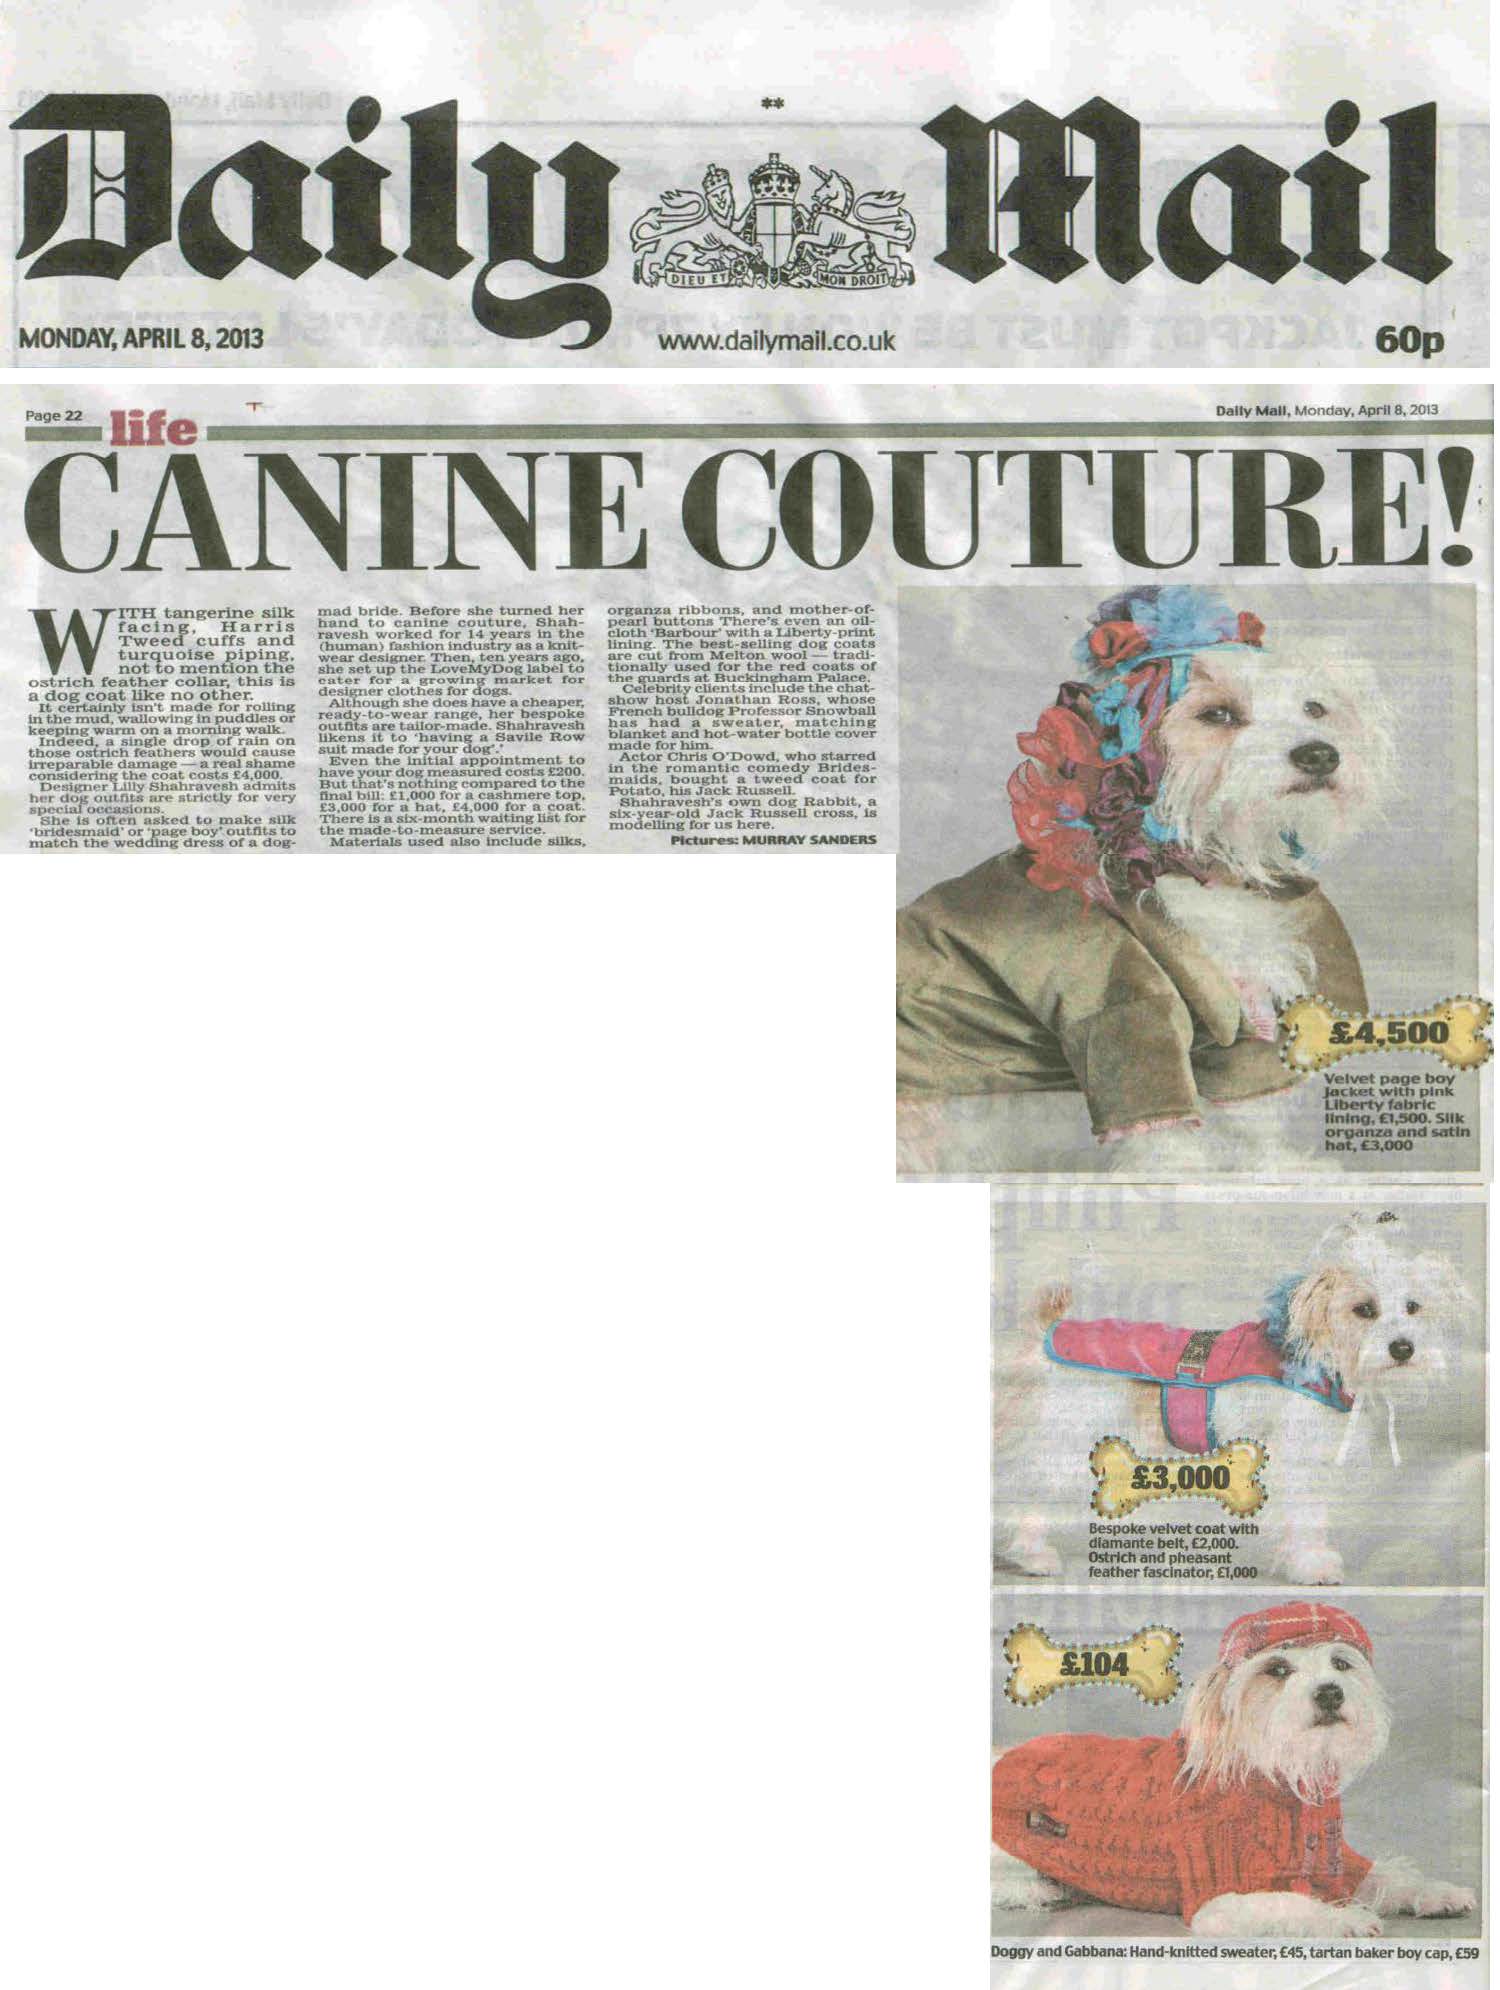 dog, dogs, style, magazine, press, editorial, daily mail, dog, canine, couture